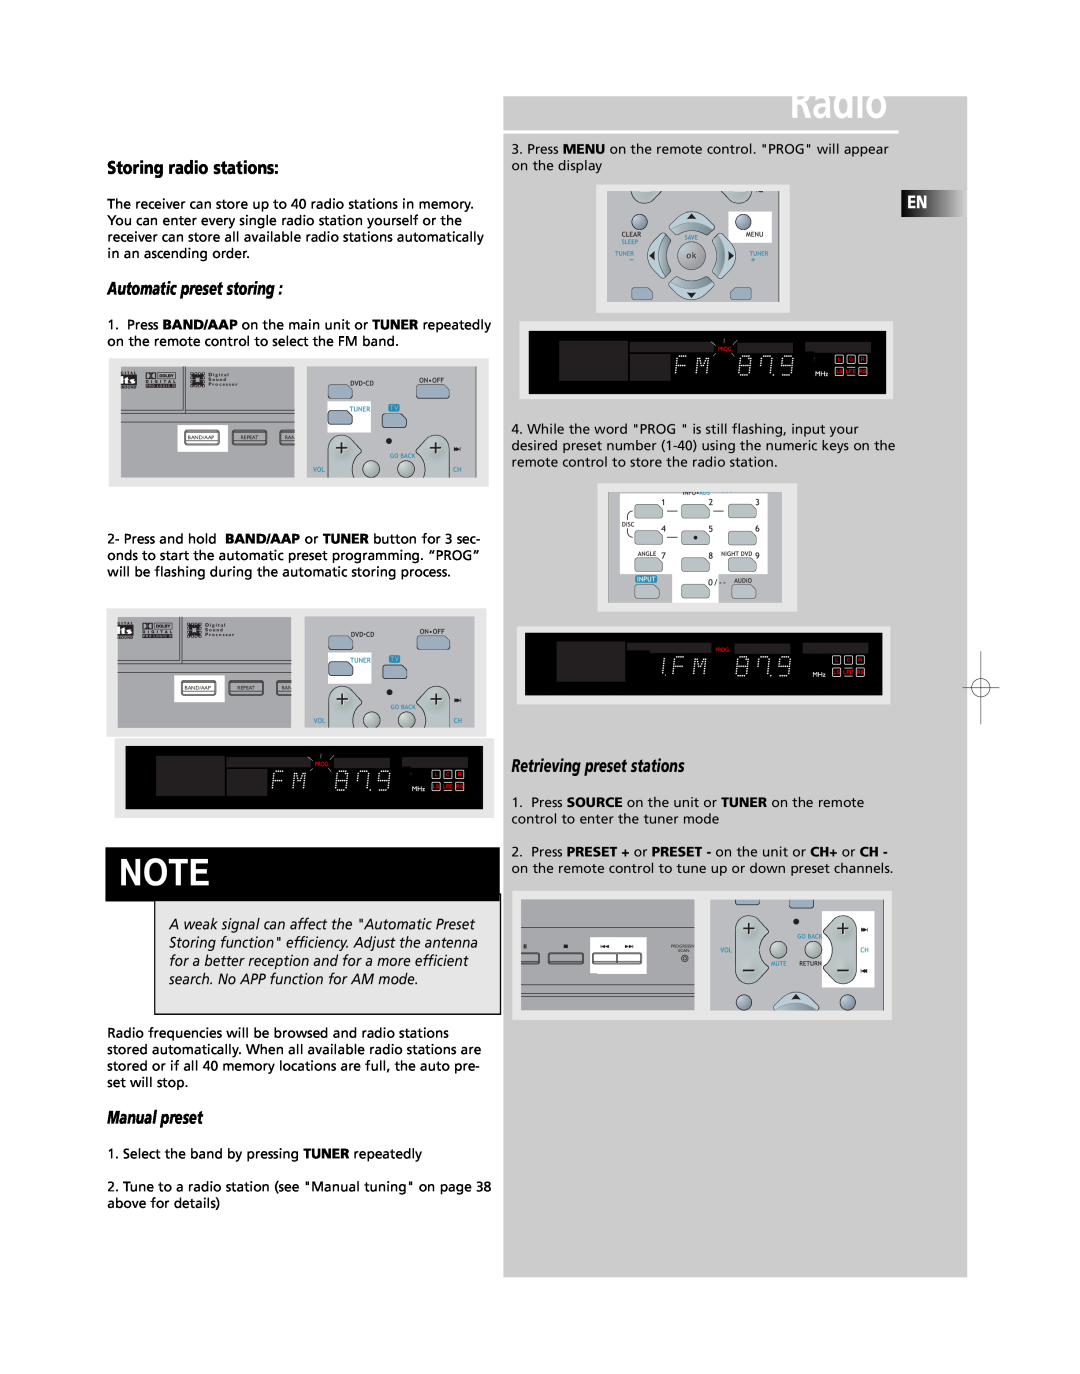 RCA RTD250 user manual Manual preset, Radio, Storing radio stations, A weak signal can affect the Automatic Preset 